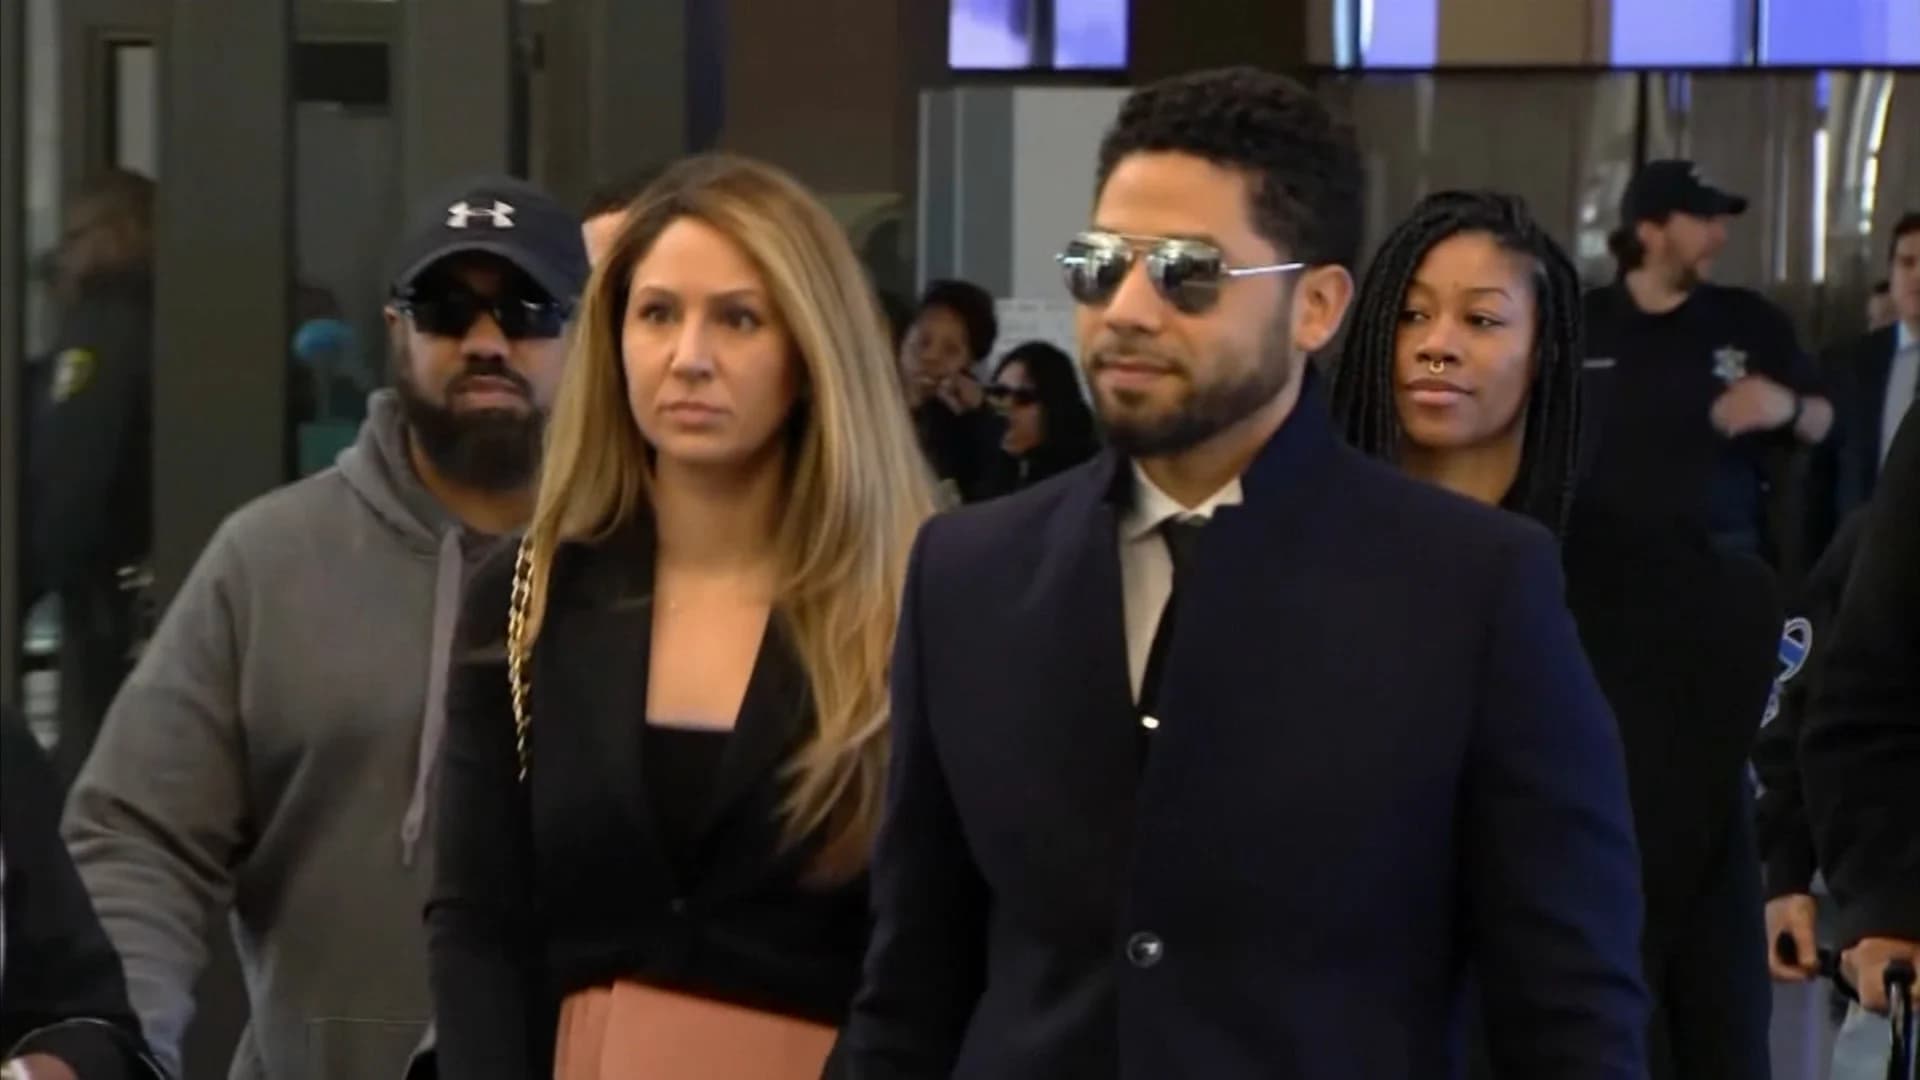 ‘Lawyer driven nonsense’ -- Jussie Smollett's attorneys call lawsuit 'ridiculous'